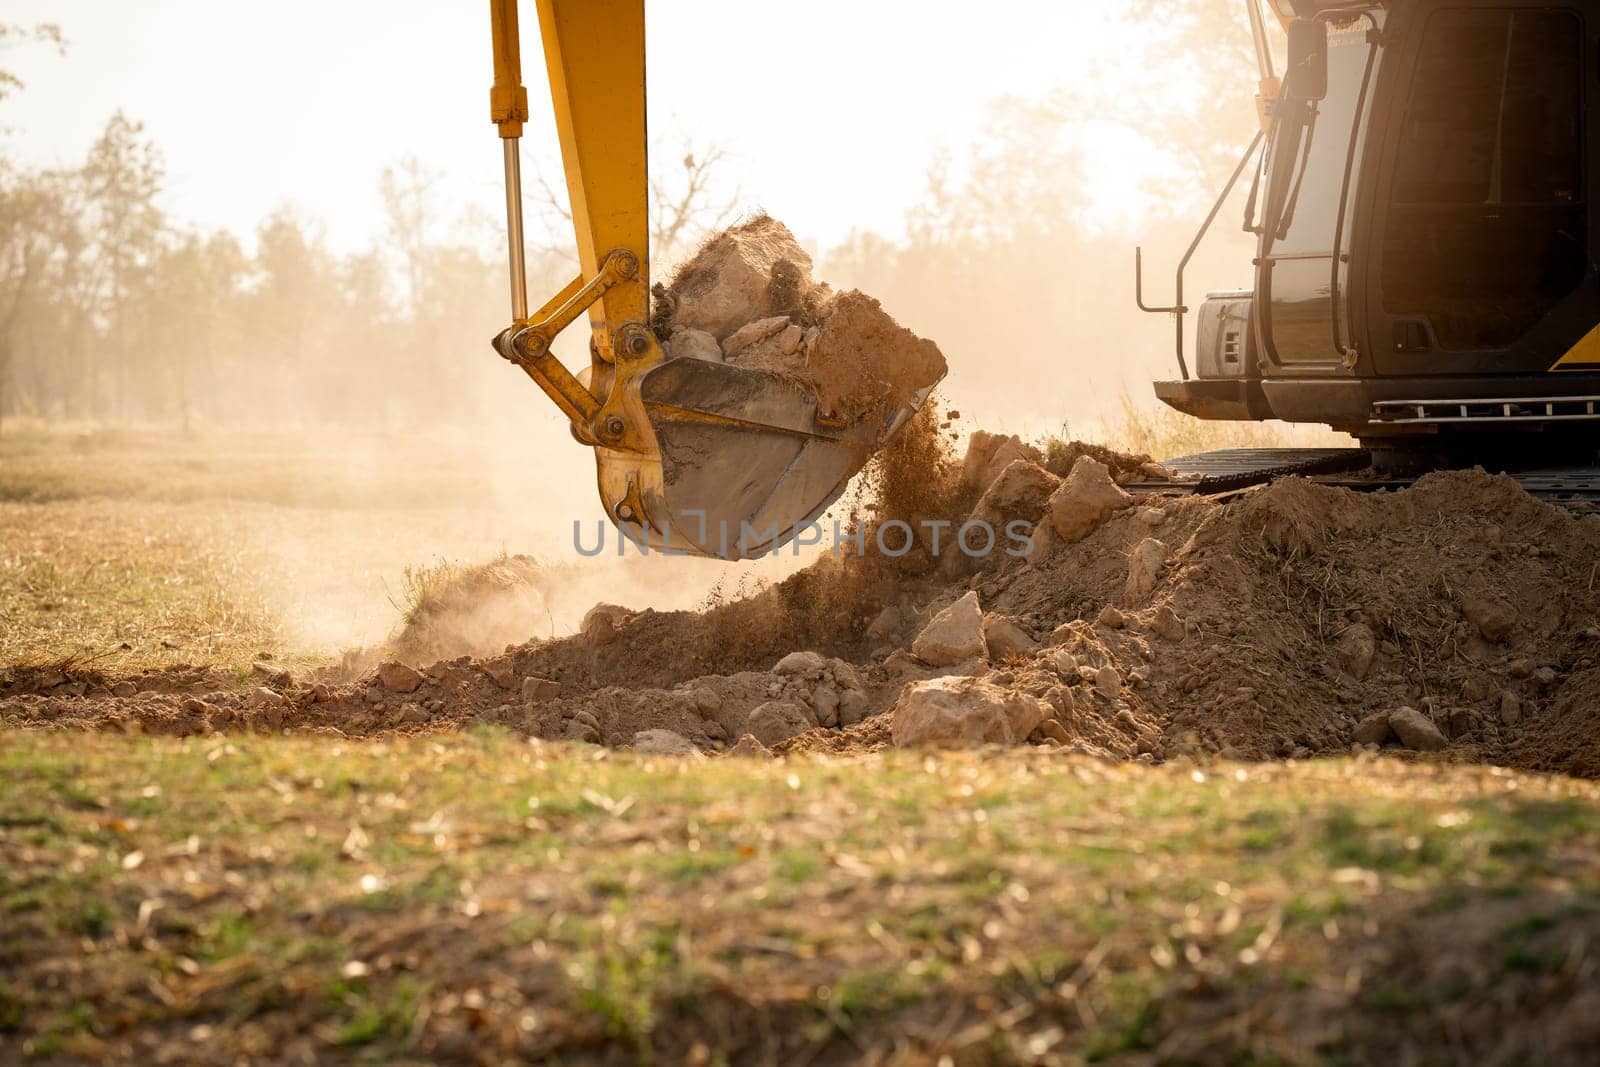 Backhoe working by digging soil at construction site.  Crawler excavator digging on demolition site. Excavating machine. Earth moving machine. Excavation vehicle. Construction business. by Fahroni